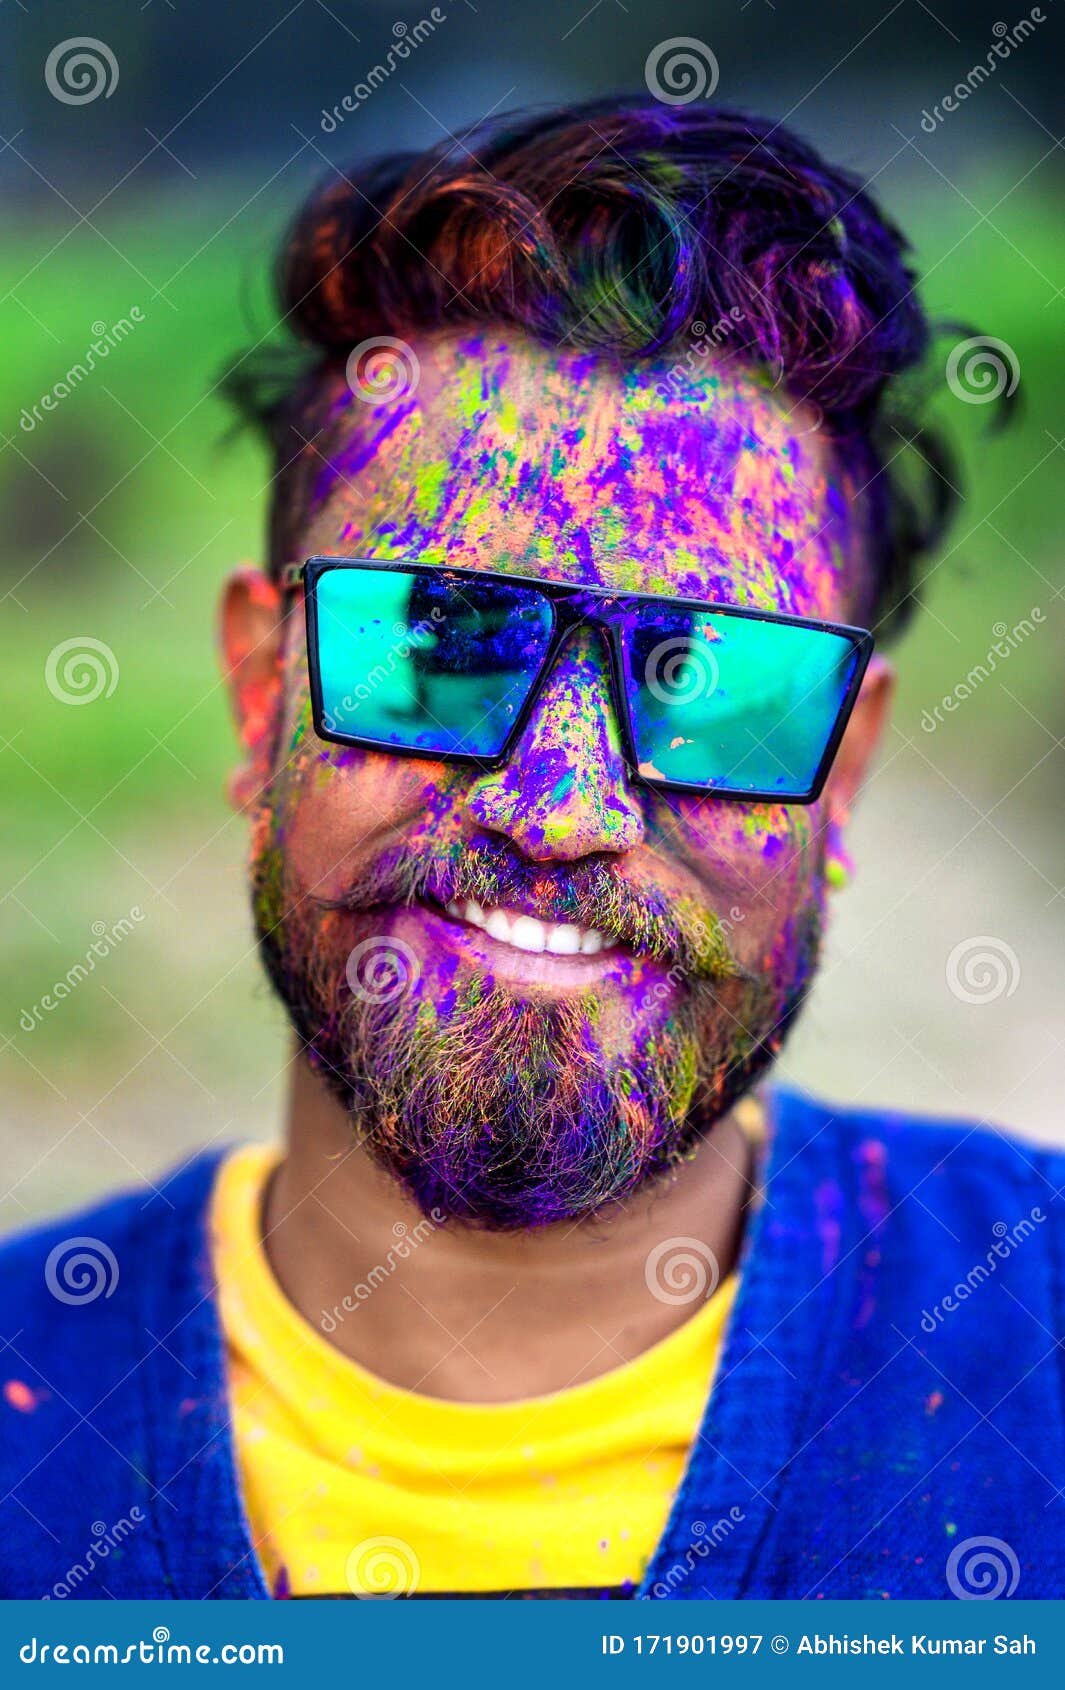 Portrait of Indian Man with Beard and Mustache in Powder Colors Celebrating  Holi and Looking at Camera. Stock Image - Image of face, festive: 171901997